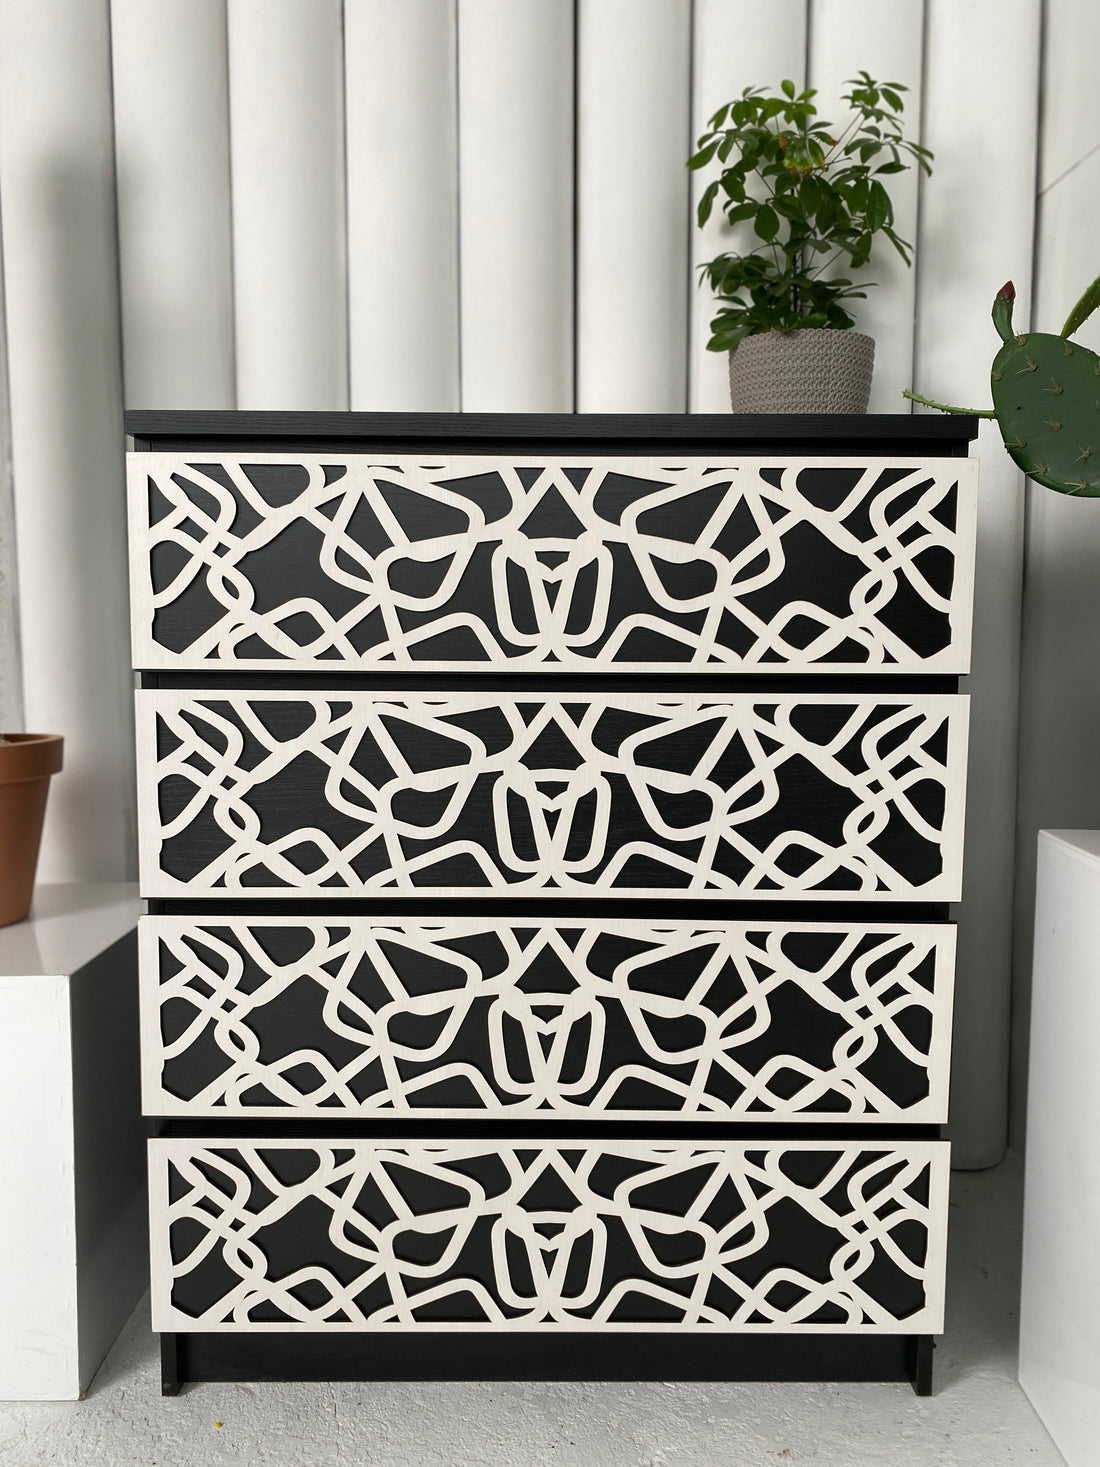 Overlay wooden panels for decorating ikea malm dresser with abstract pattern - Artvoom